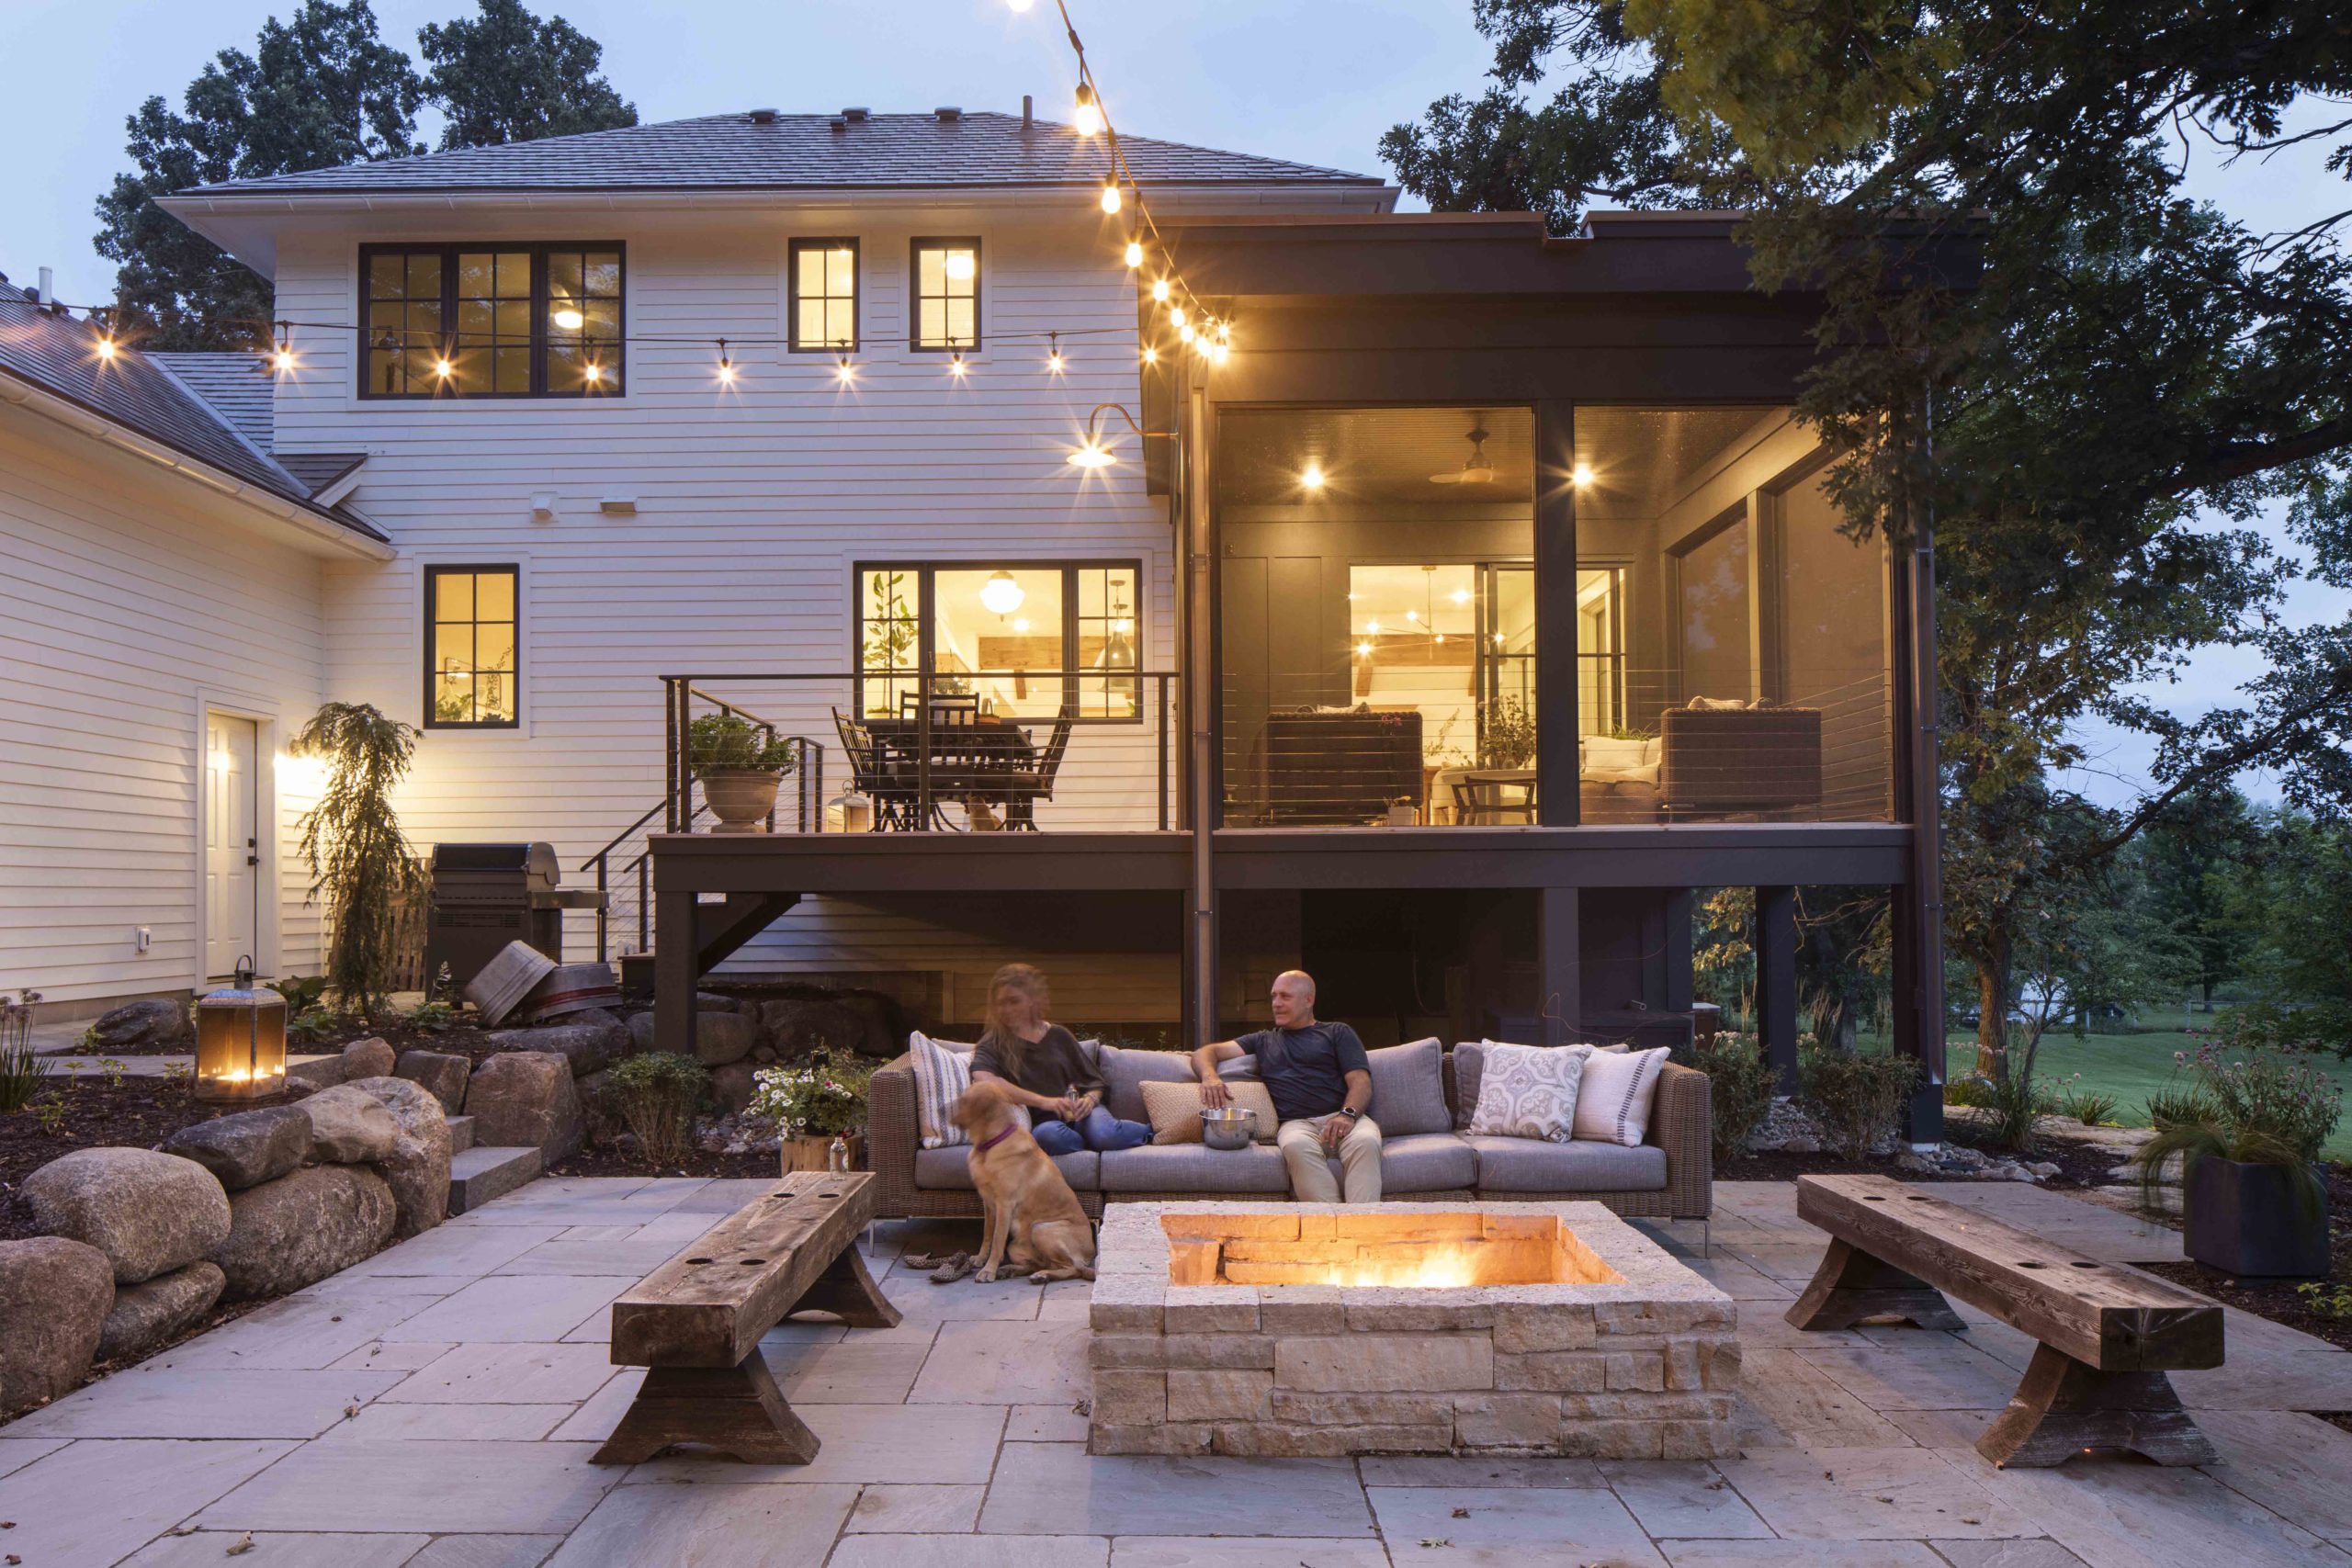 A couple enjoys the cozy ambiance of a fire pit in their backyard of a custom home.